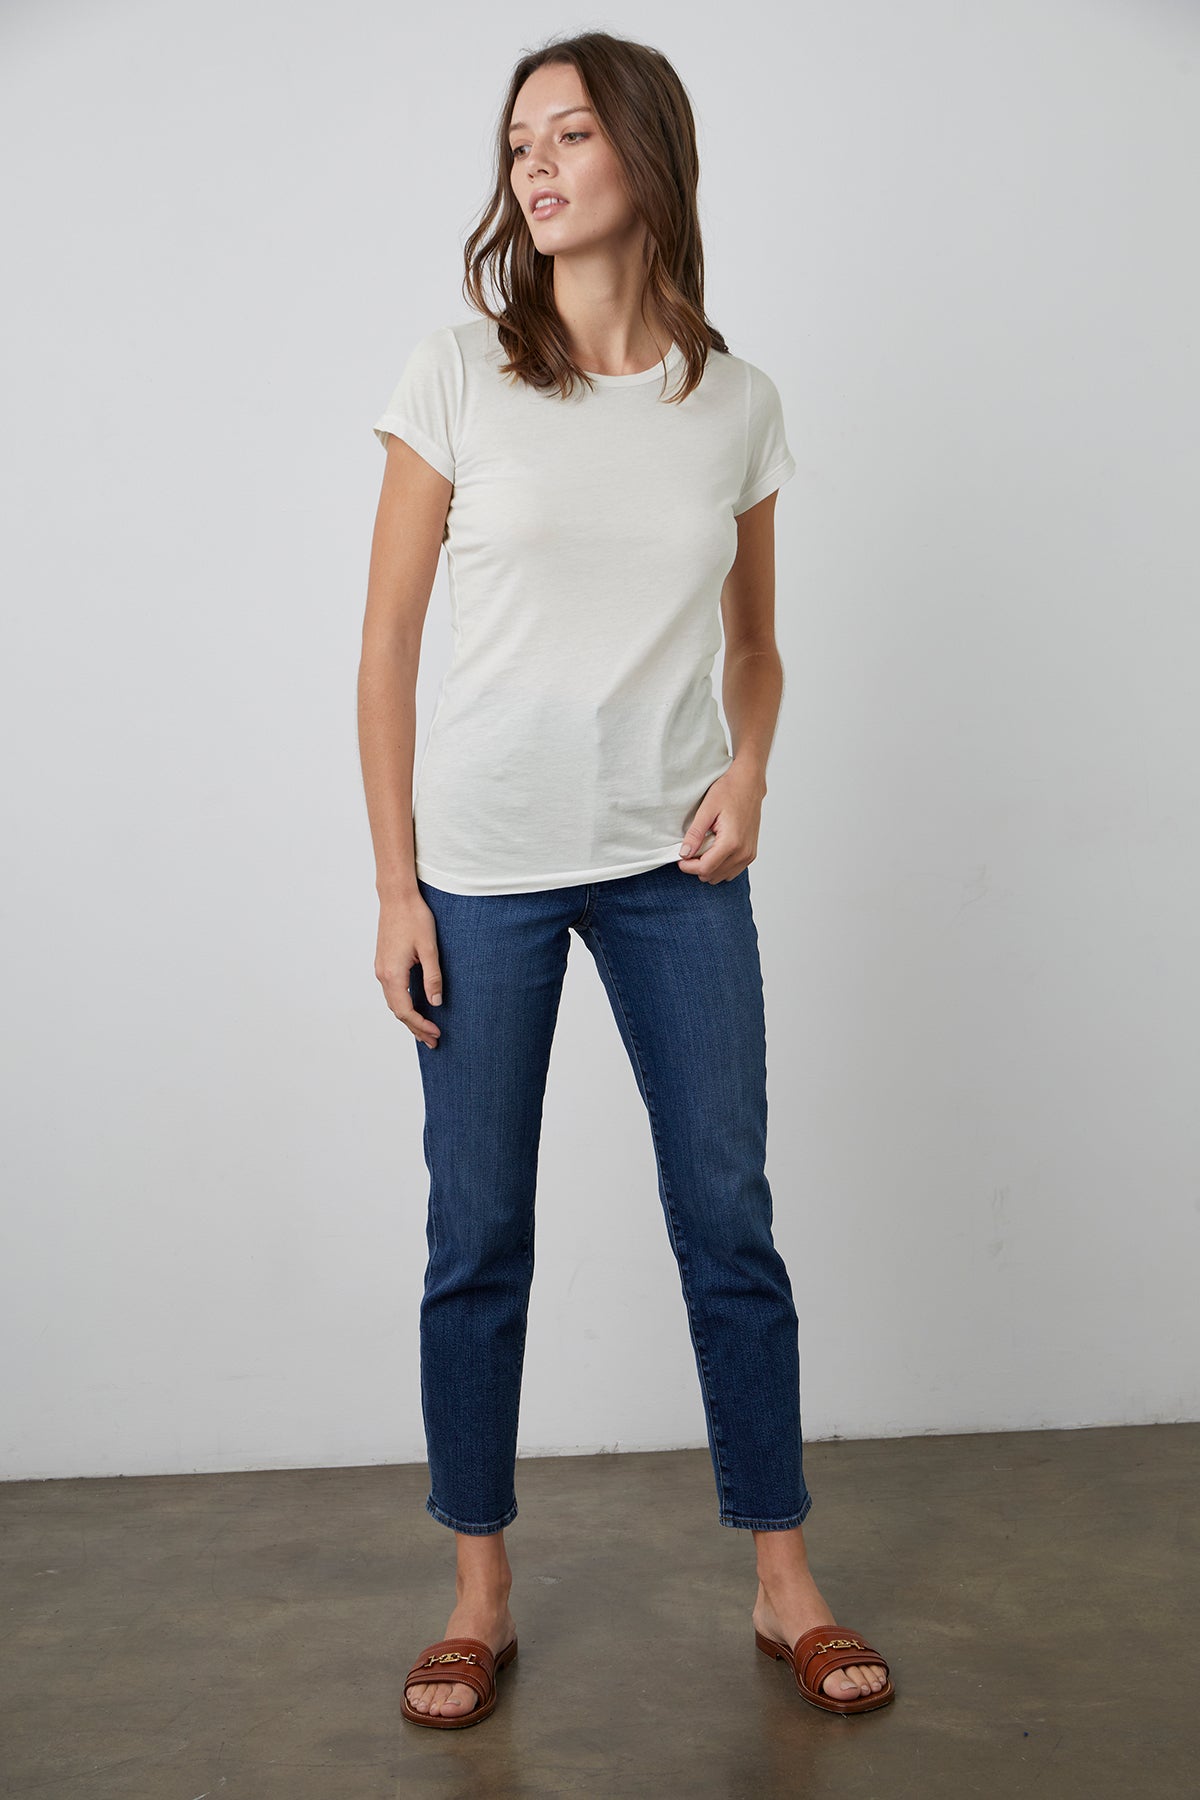 The model is wearing a JEMMA GAUZY WHISPER FITTED CREW NECK TEE by Velvet by Graham & Spencer and blue jeans.-26630463291585